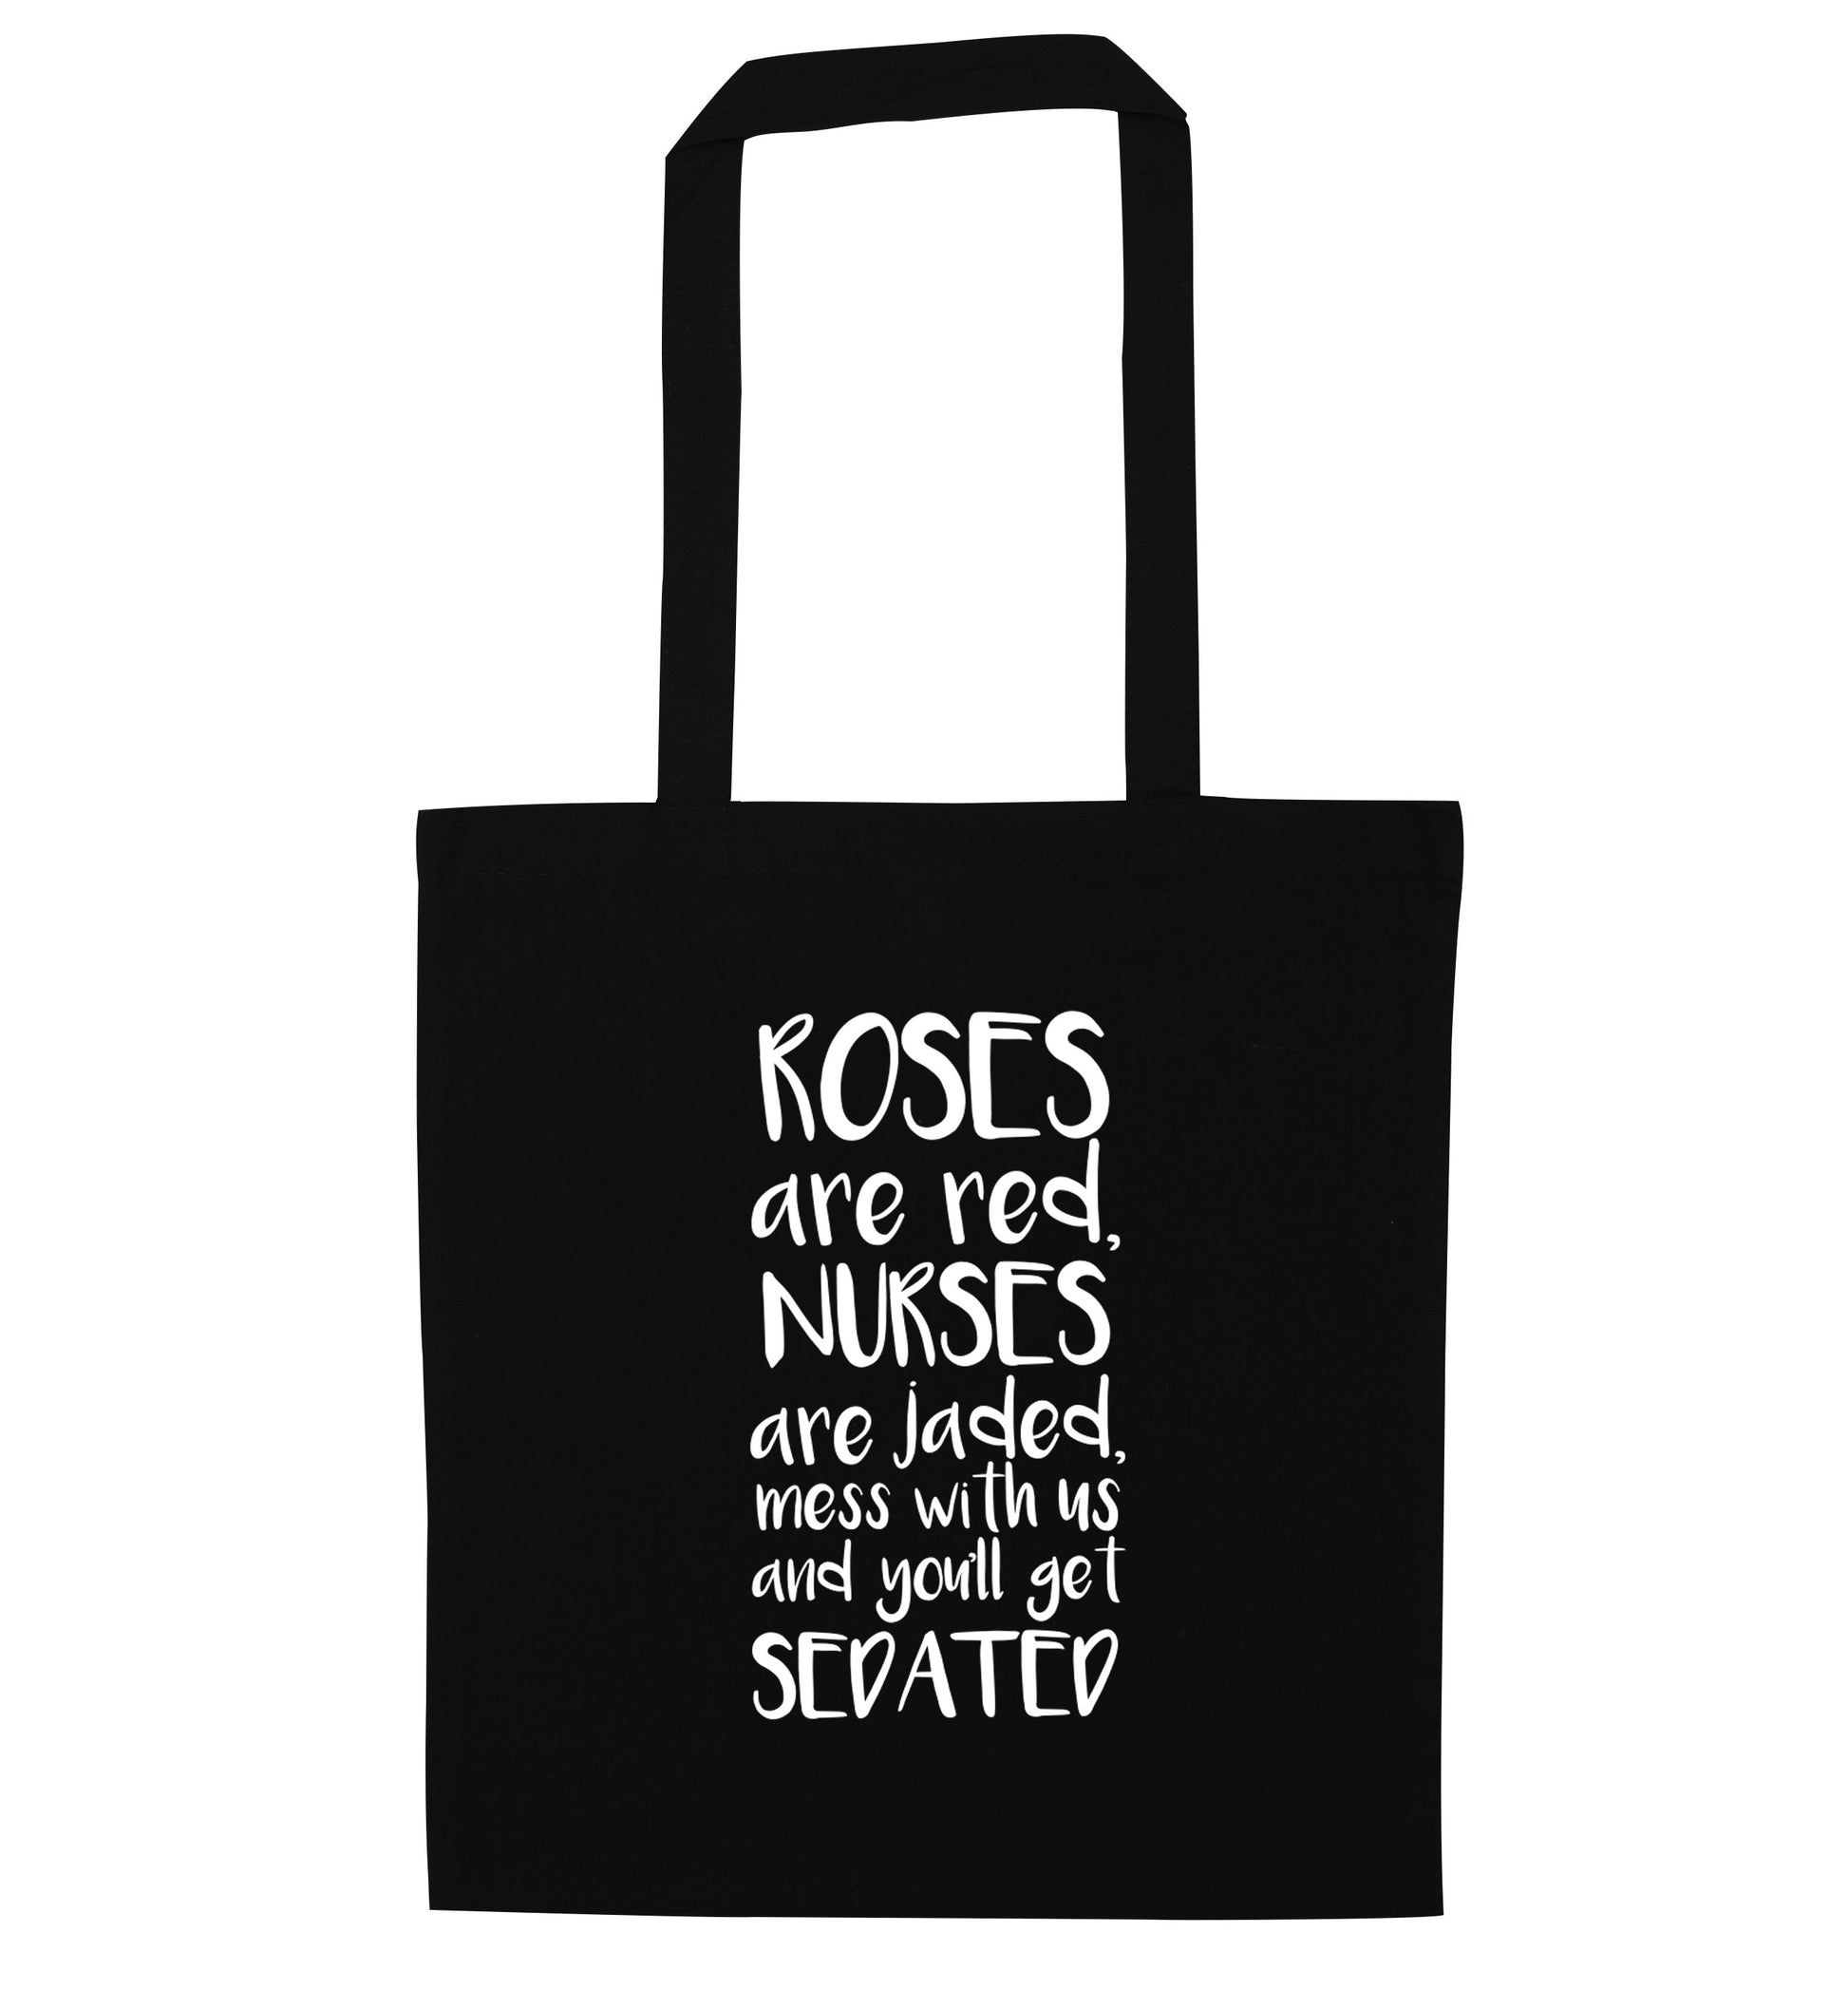 Roses are red, nurses are jaded, mess with us and you'll get sedated black tote bag